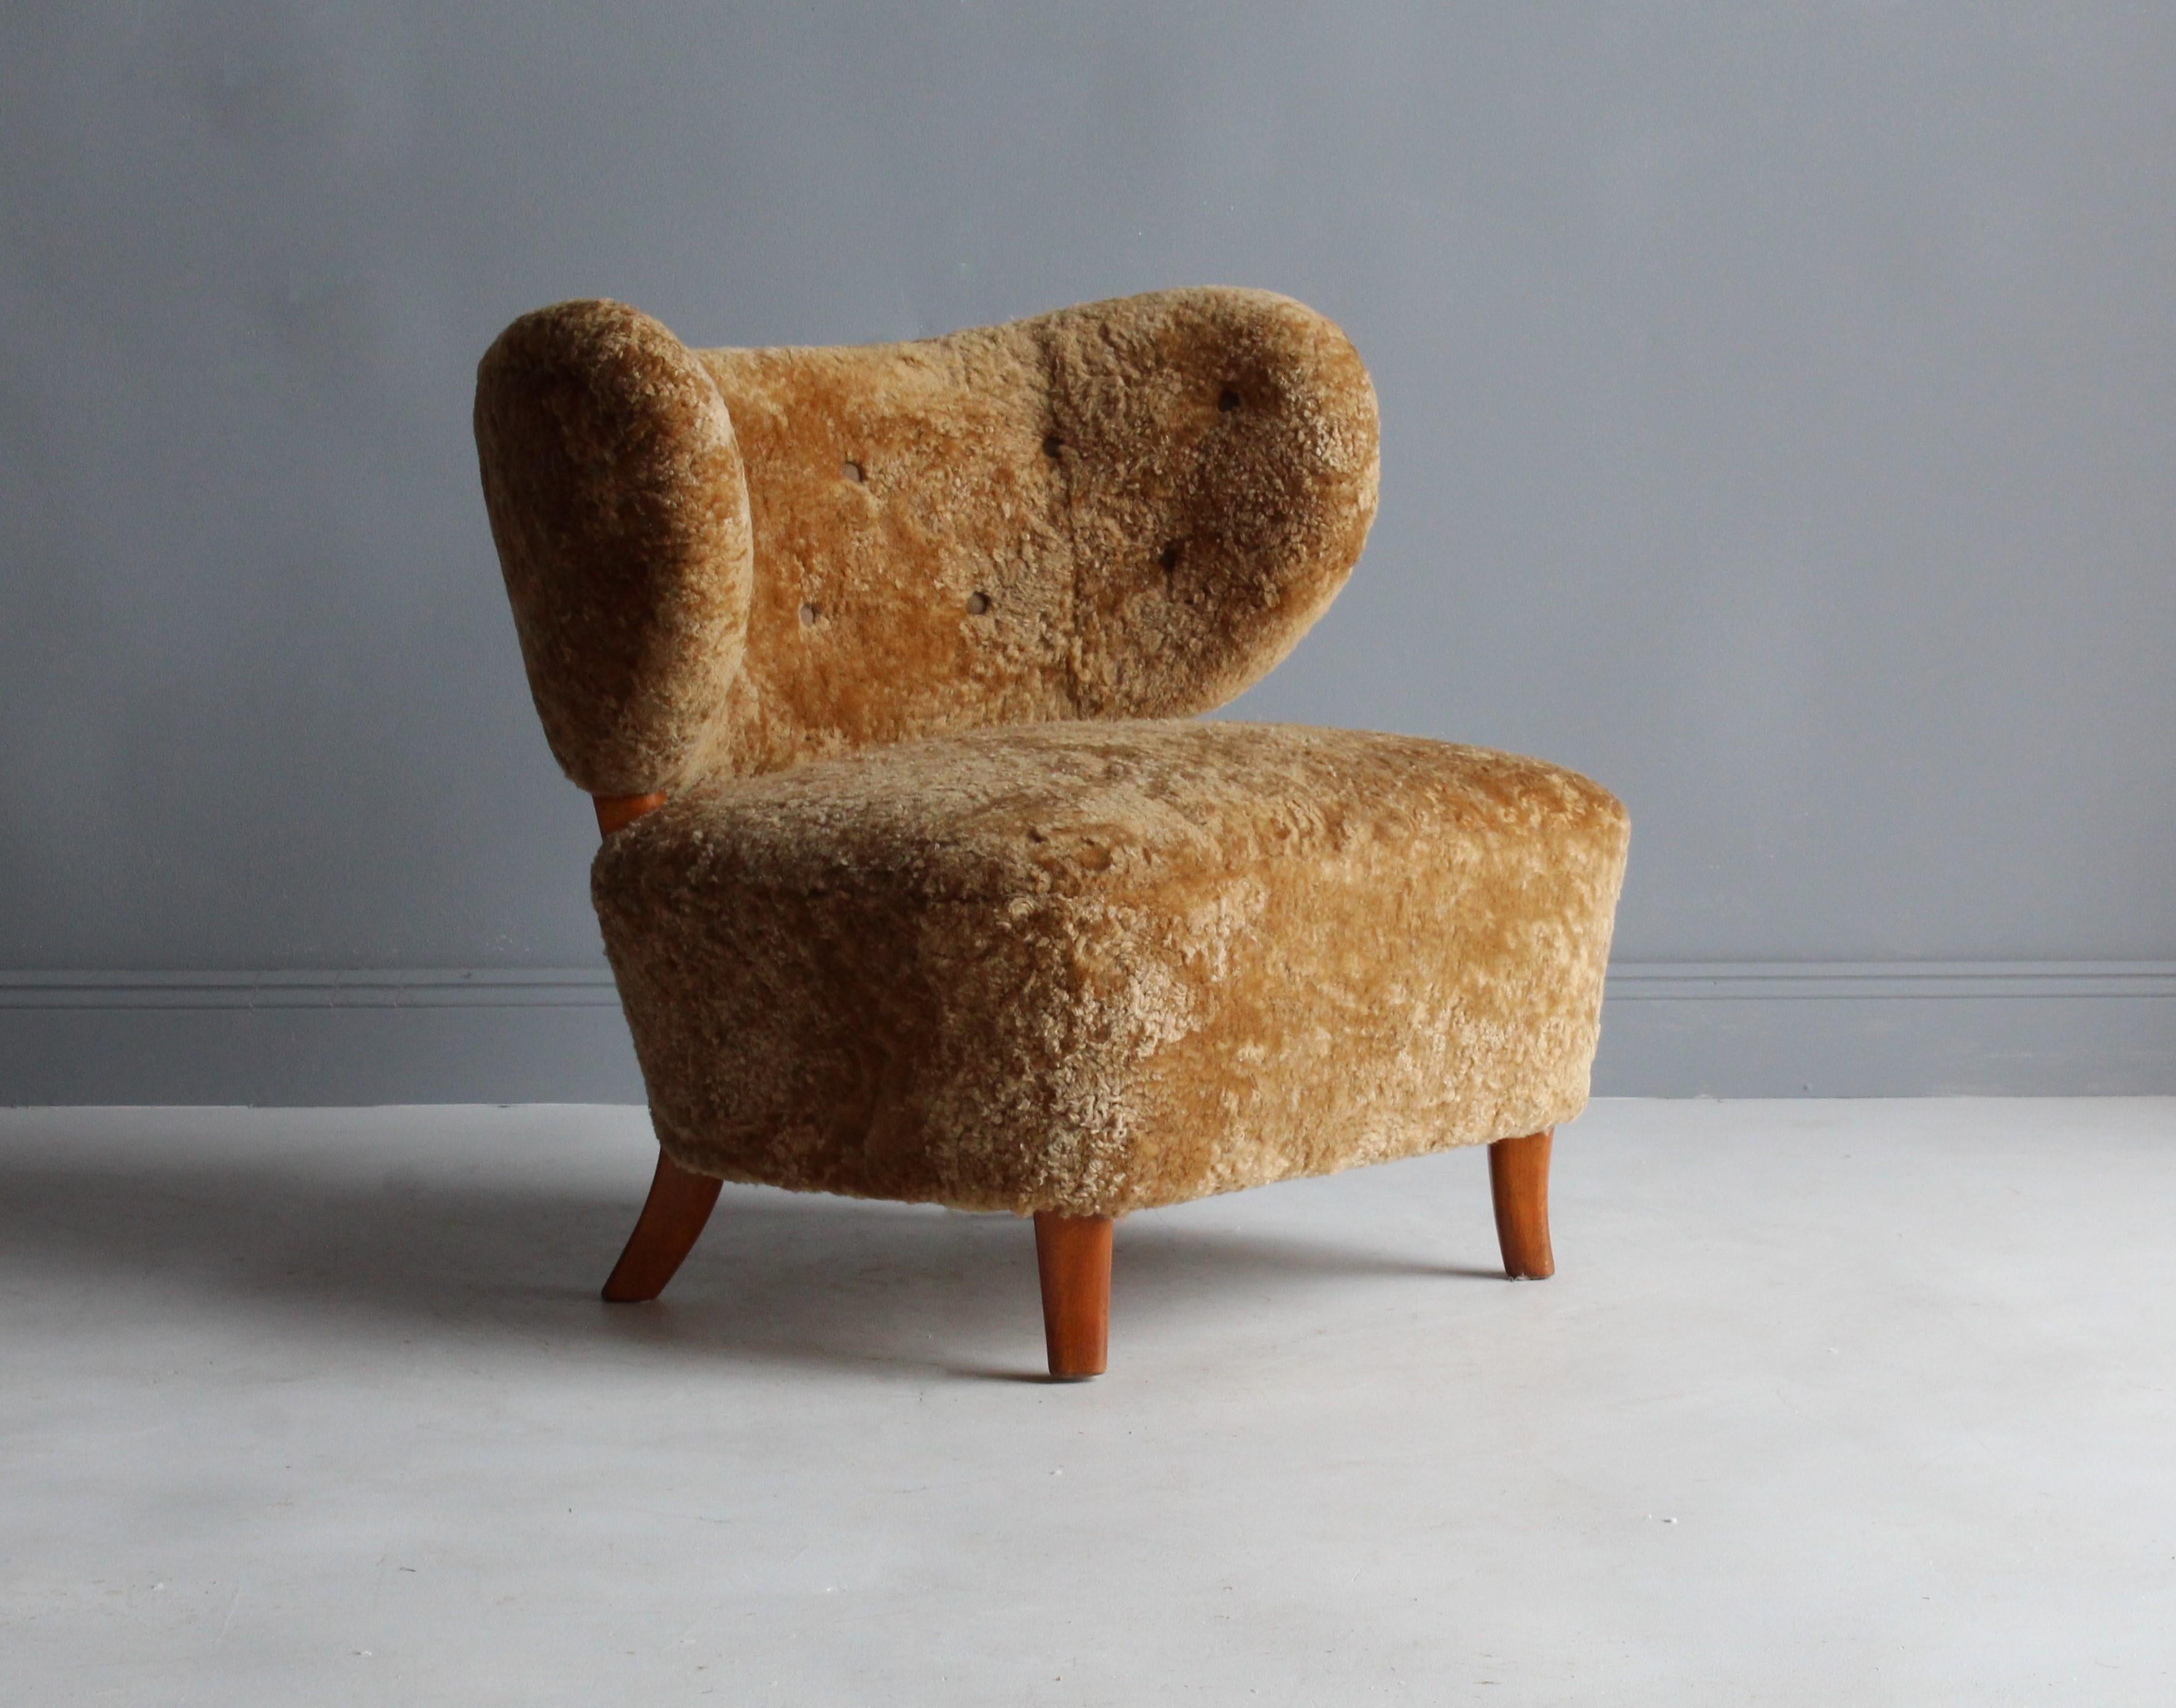 An organic lounge chair / slipper chair attributed to Otto Schulz, presumably manufactured by Boet, Sweden.  

Other designers working in the organic style include Flemming Lassen, Philip Arctander, Gio Ponti, and Jean Royère.

